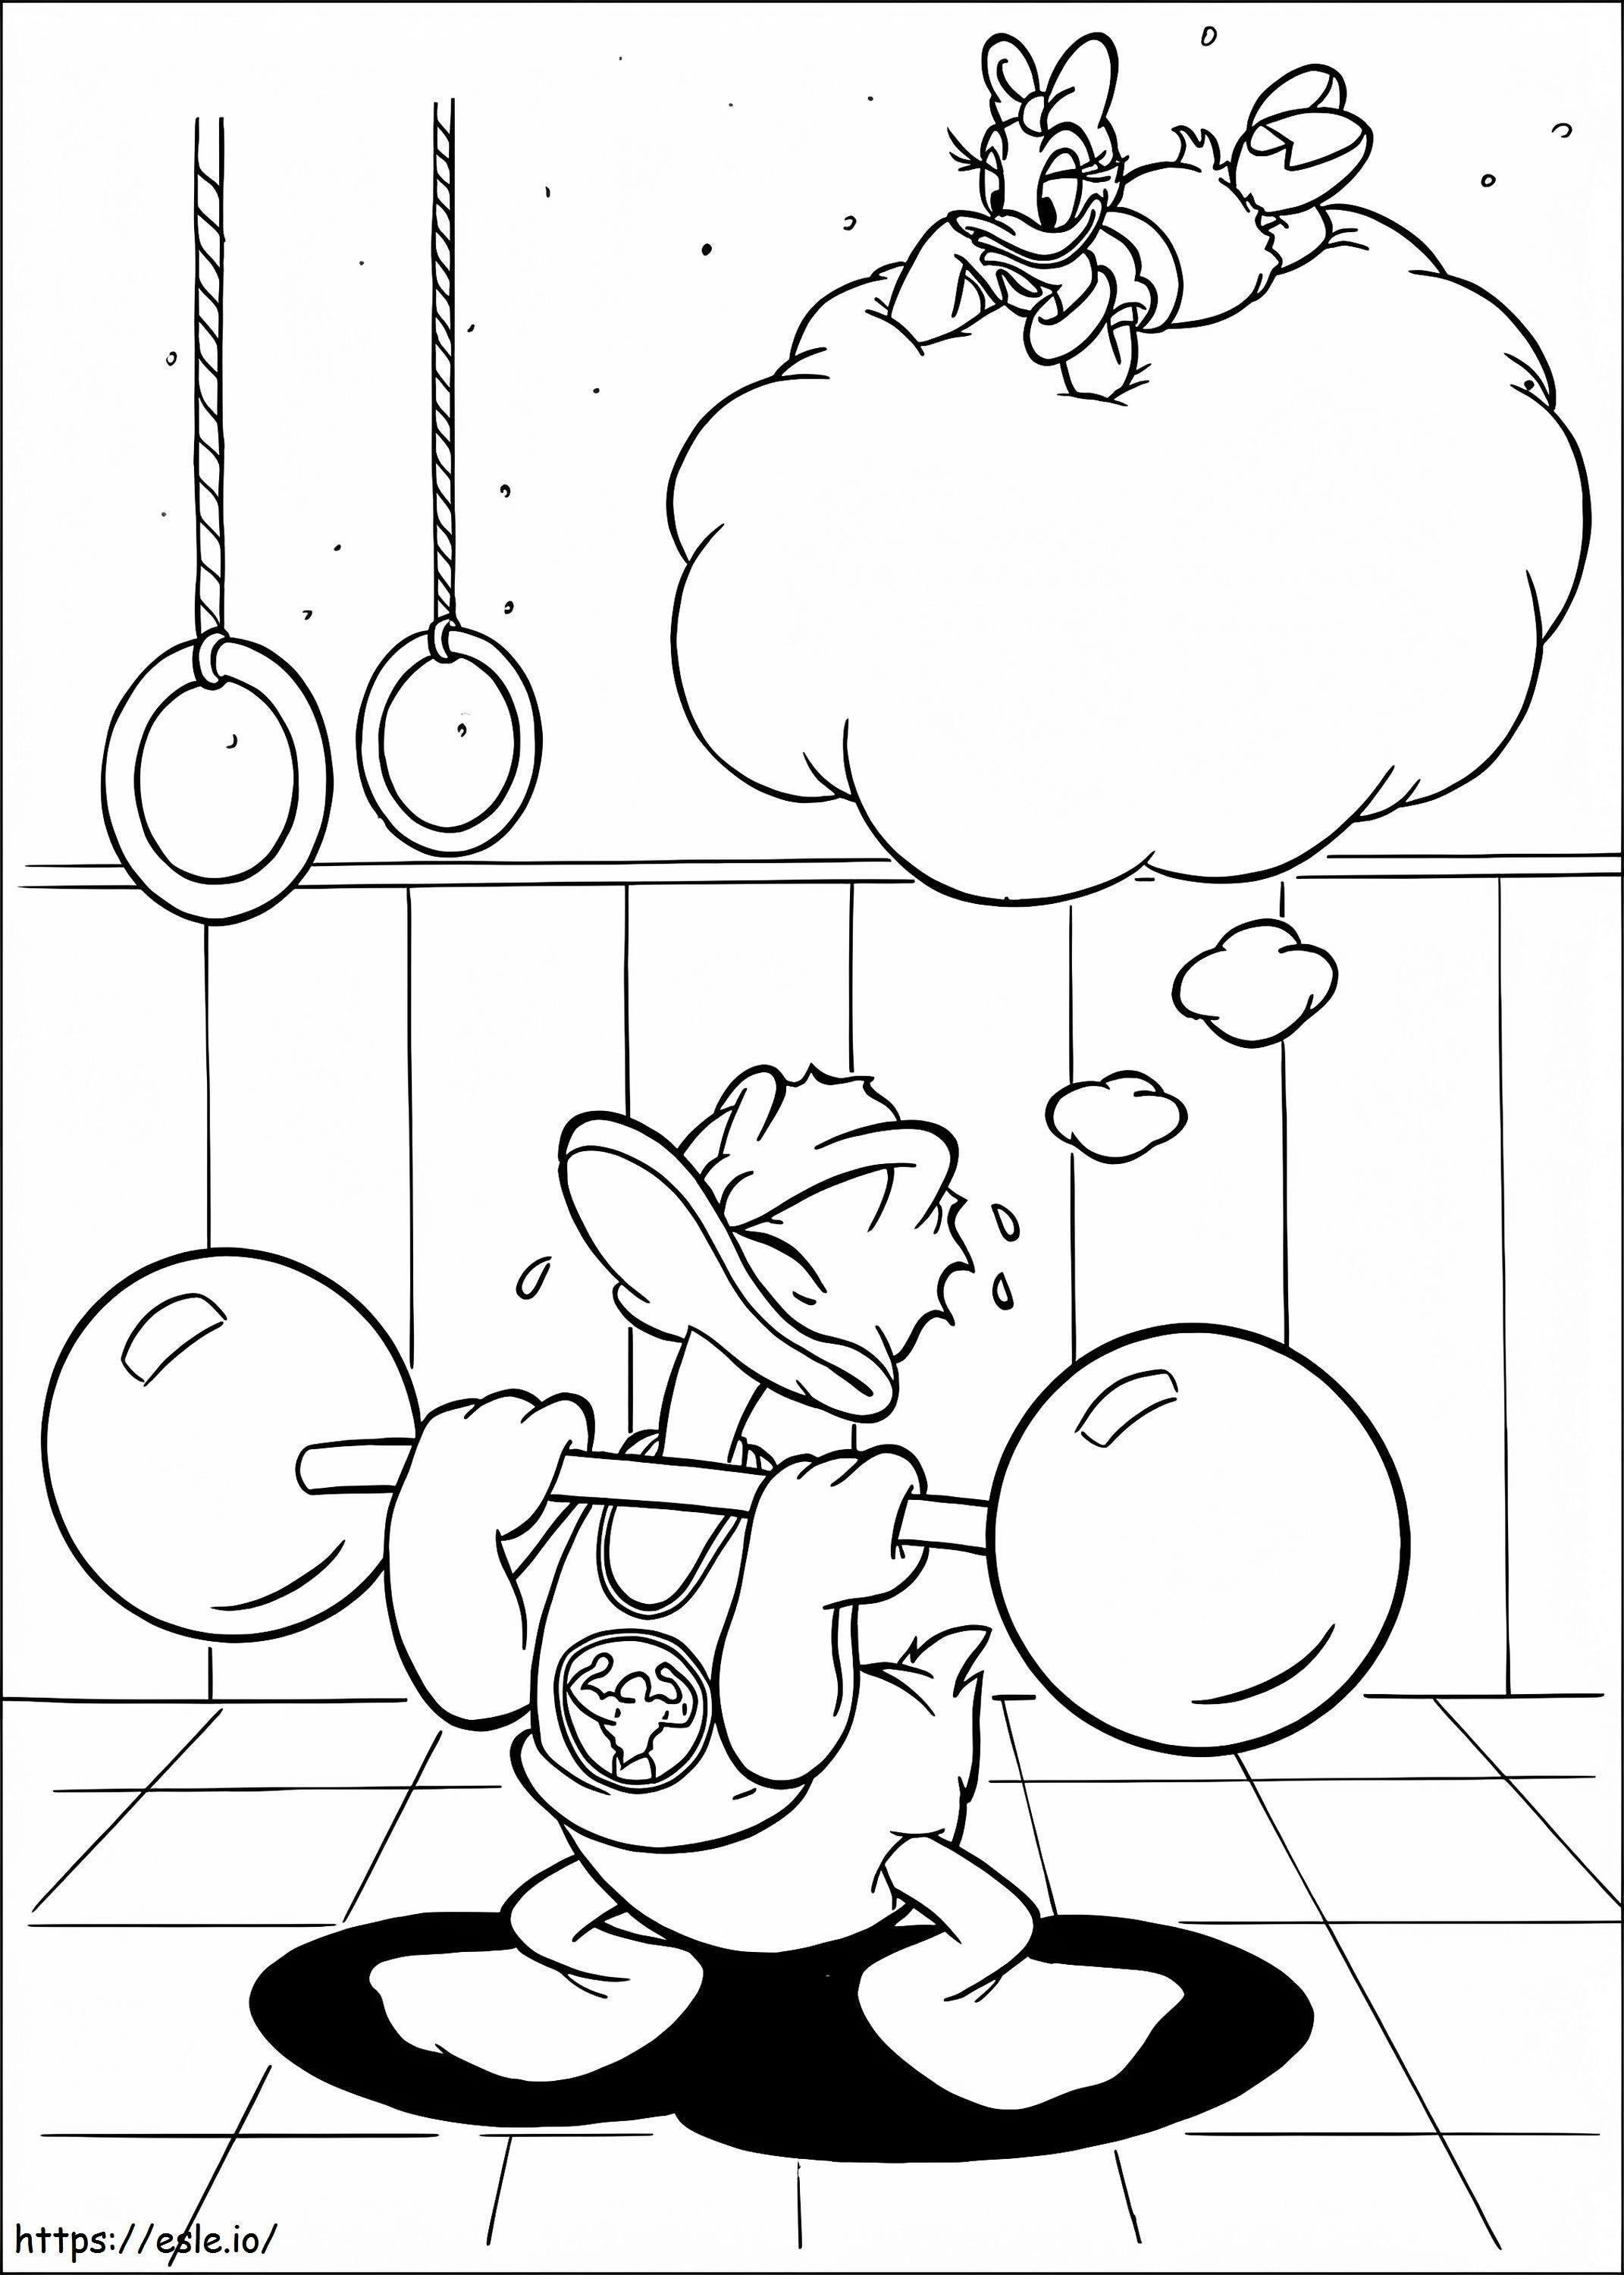 1533268997 Donald Lifting Weights A4 coloring page